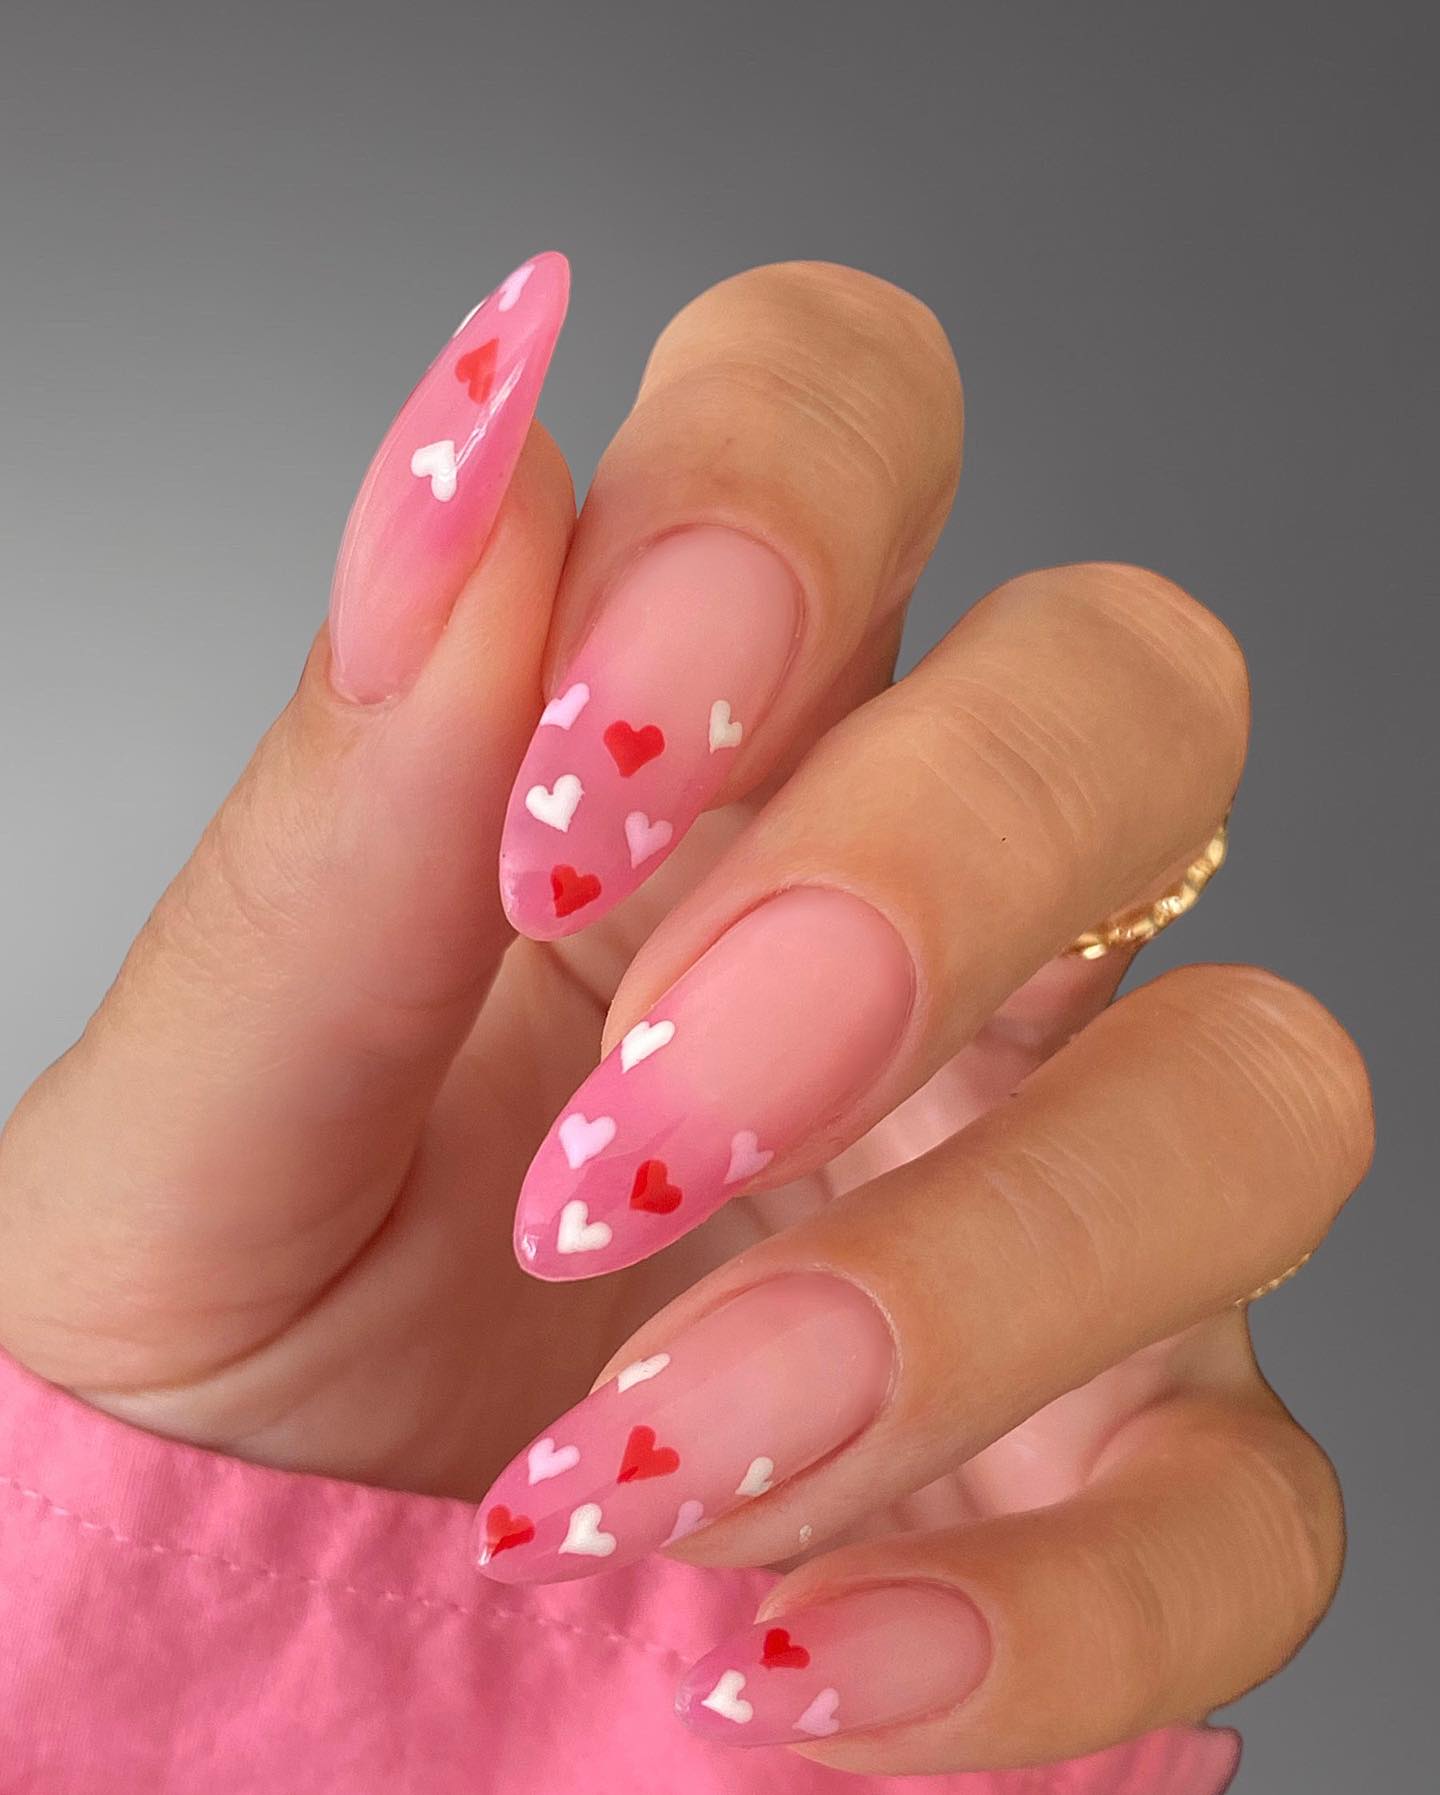 100 Of The Best Spring Inspired Nail Designs images 15